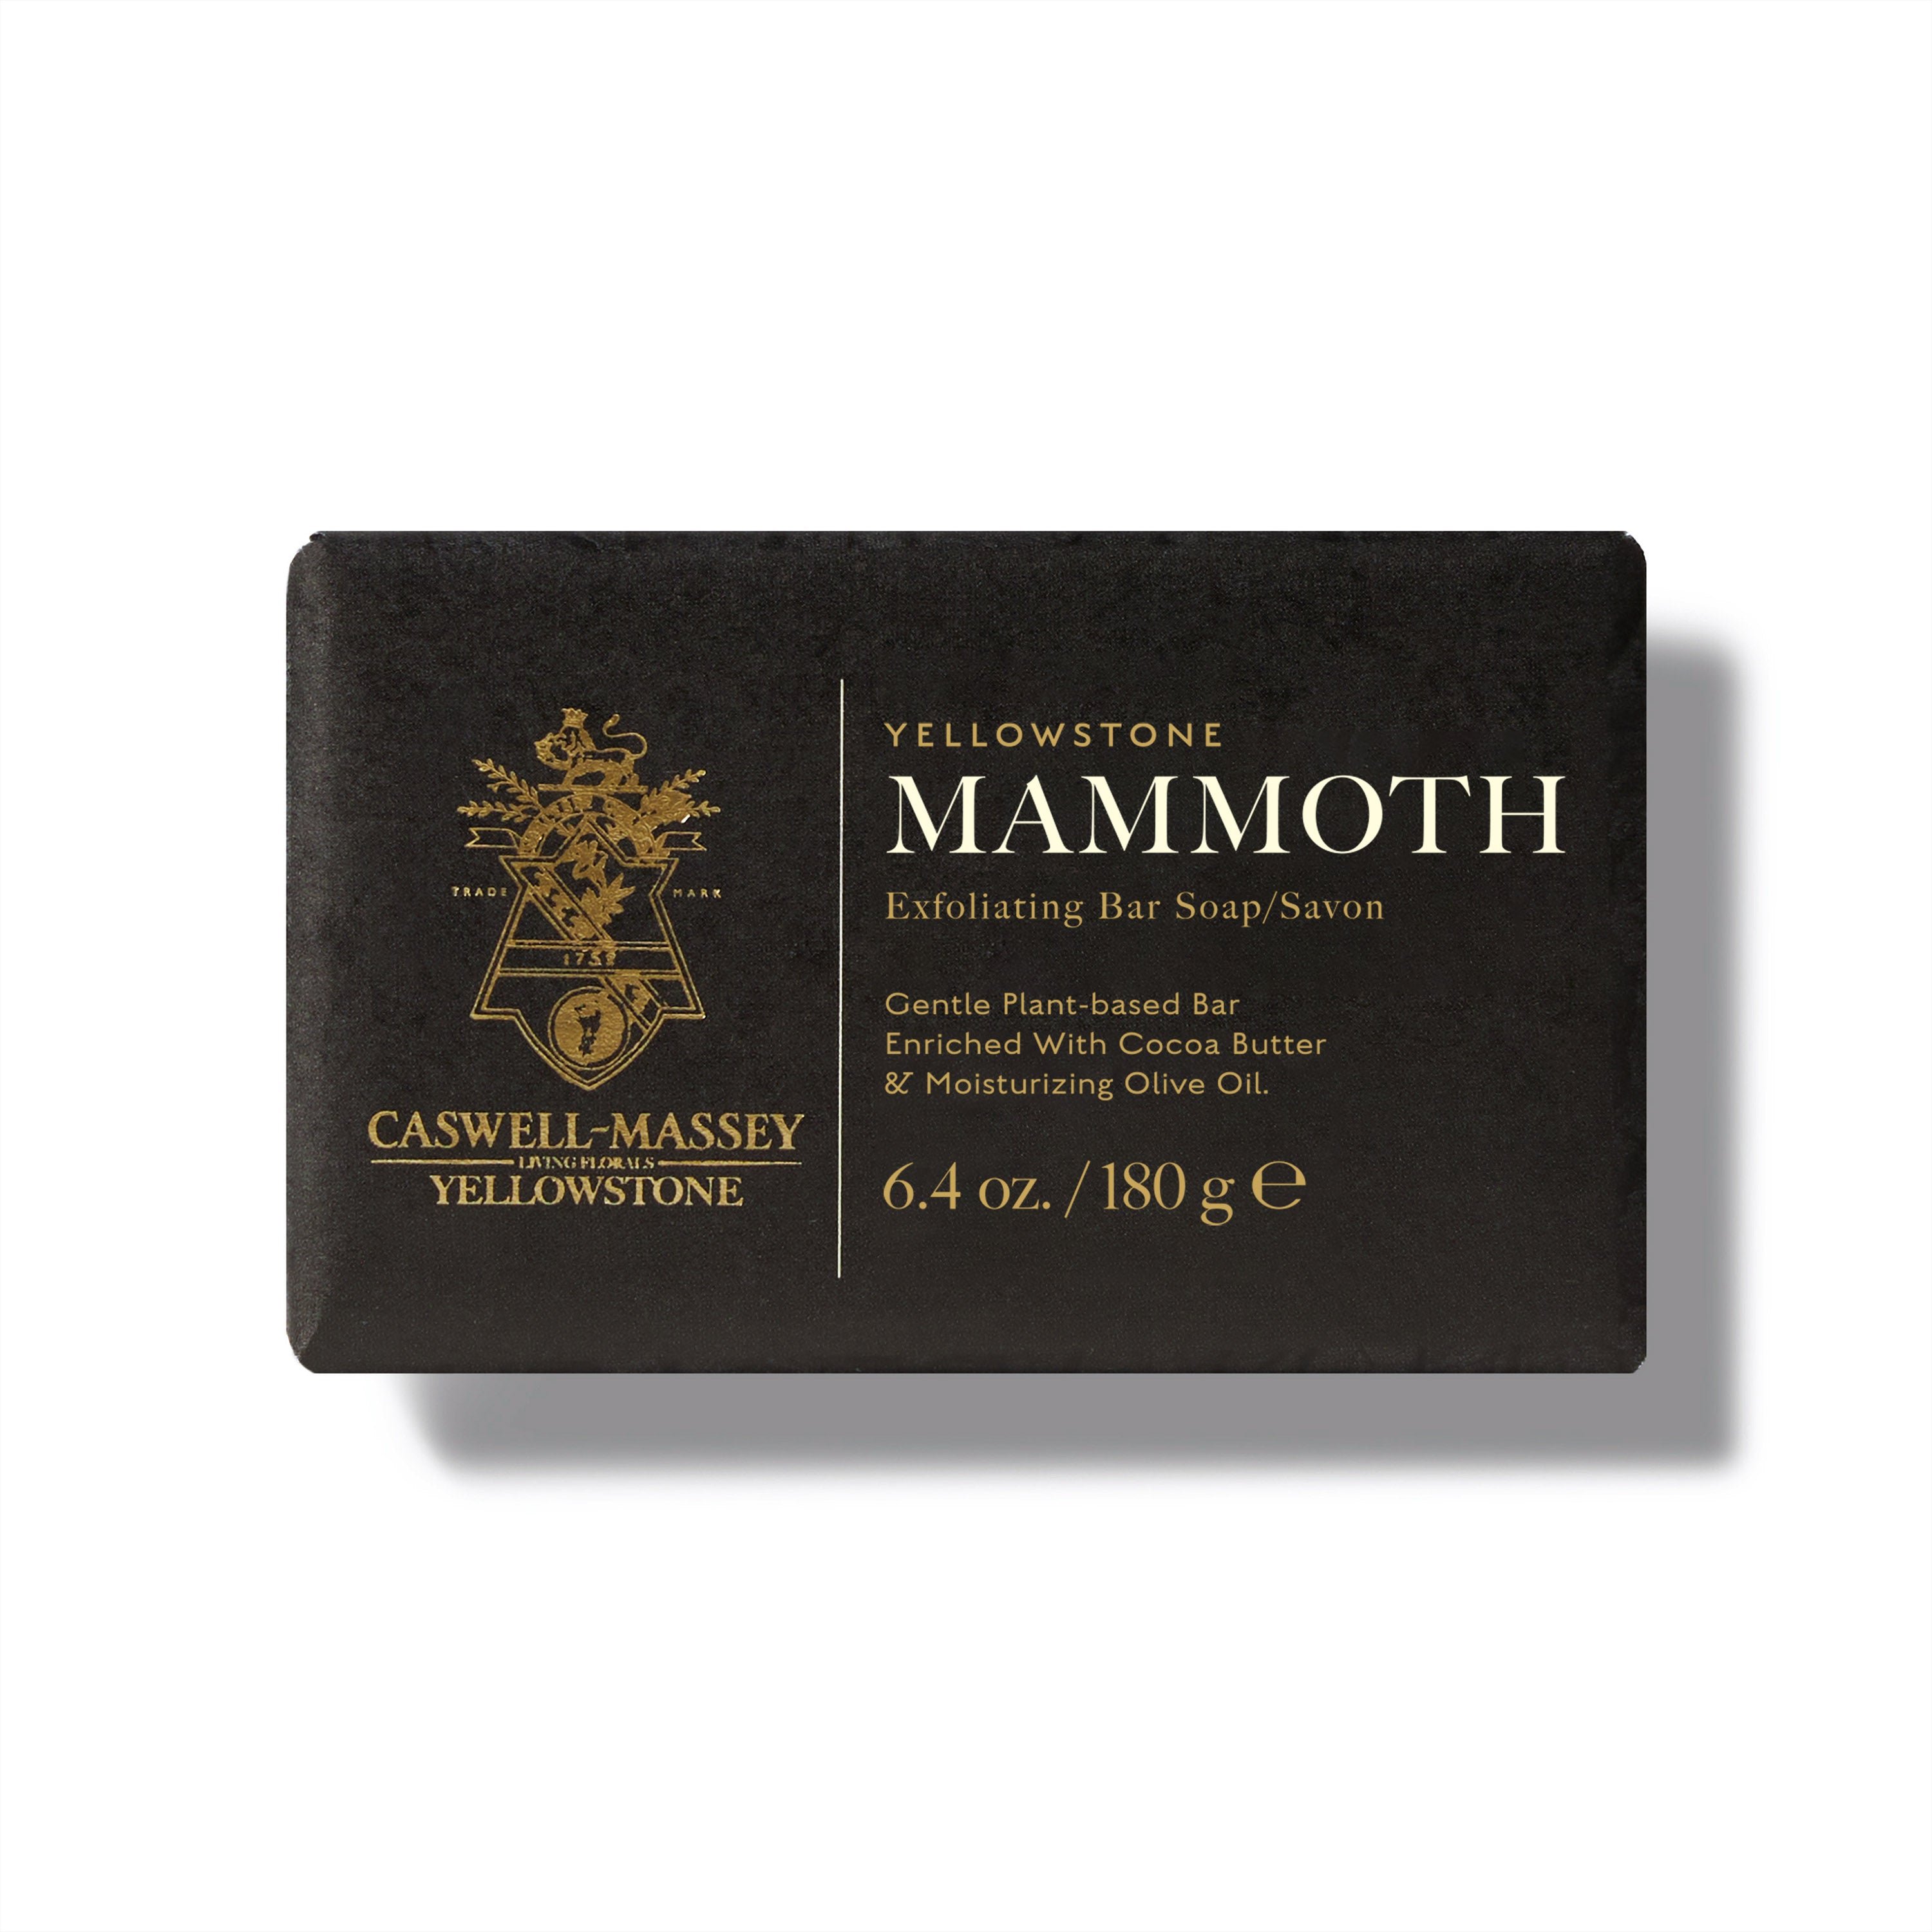 Caswell-Massey® Yellowstone Mammoth Bar Soap shown wrapped in paper (outer packaging)